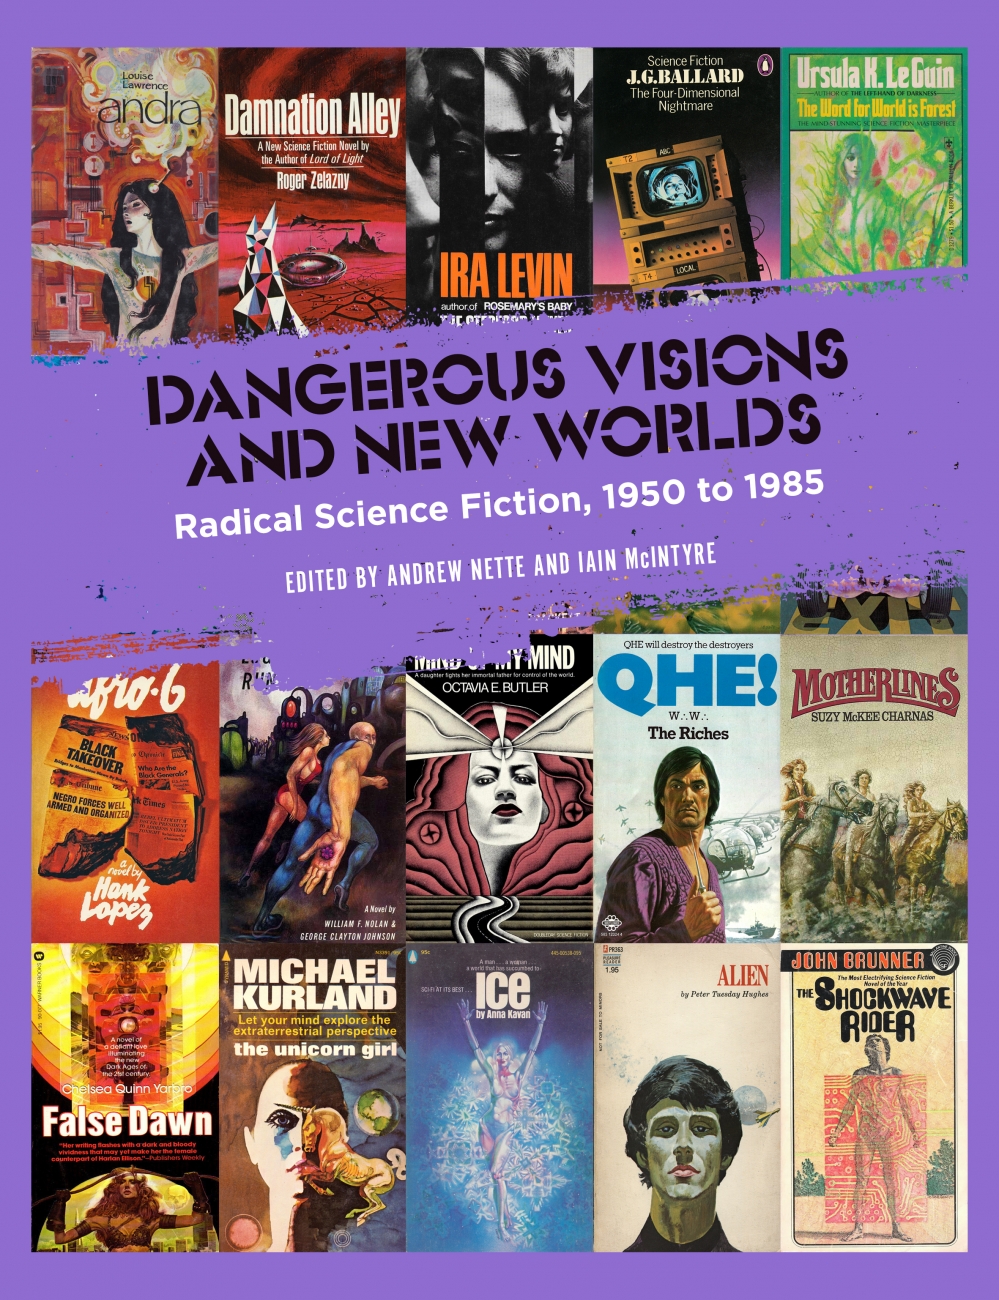 Ian Mond Reviews Dangerous Visions and New Worlds: Radical Science Fiction 1950 to 1985 by Andrew Nette & Iain McIntyre